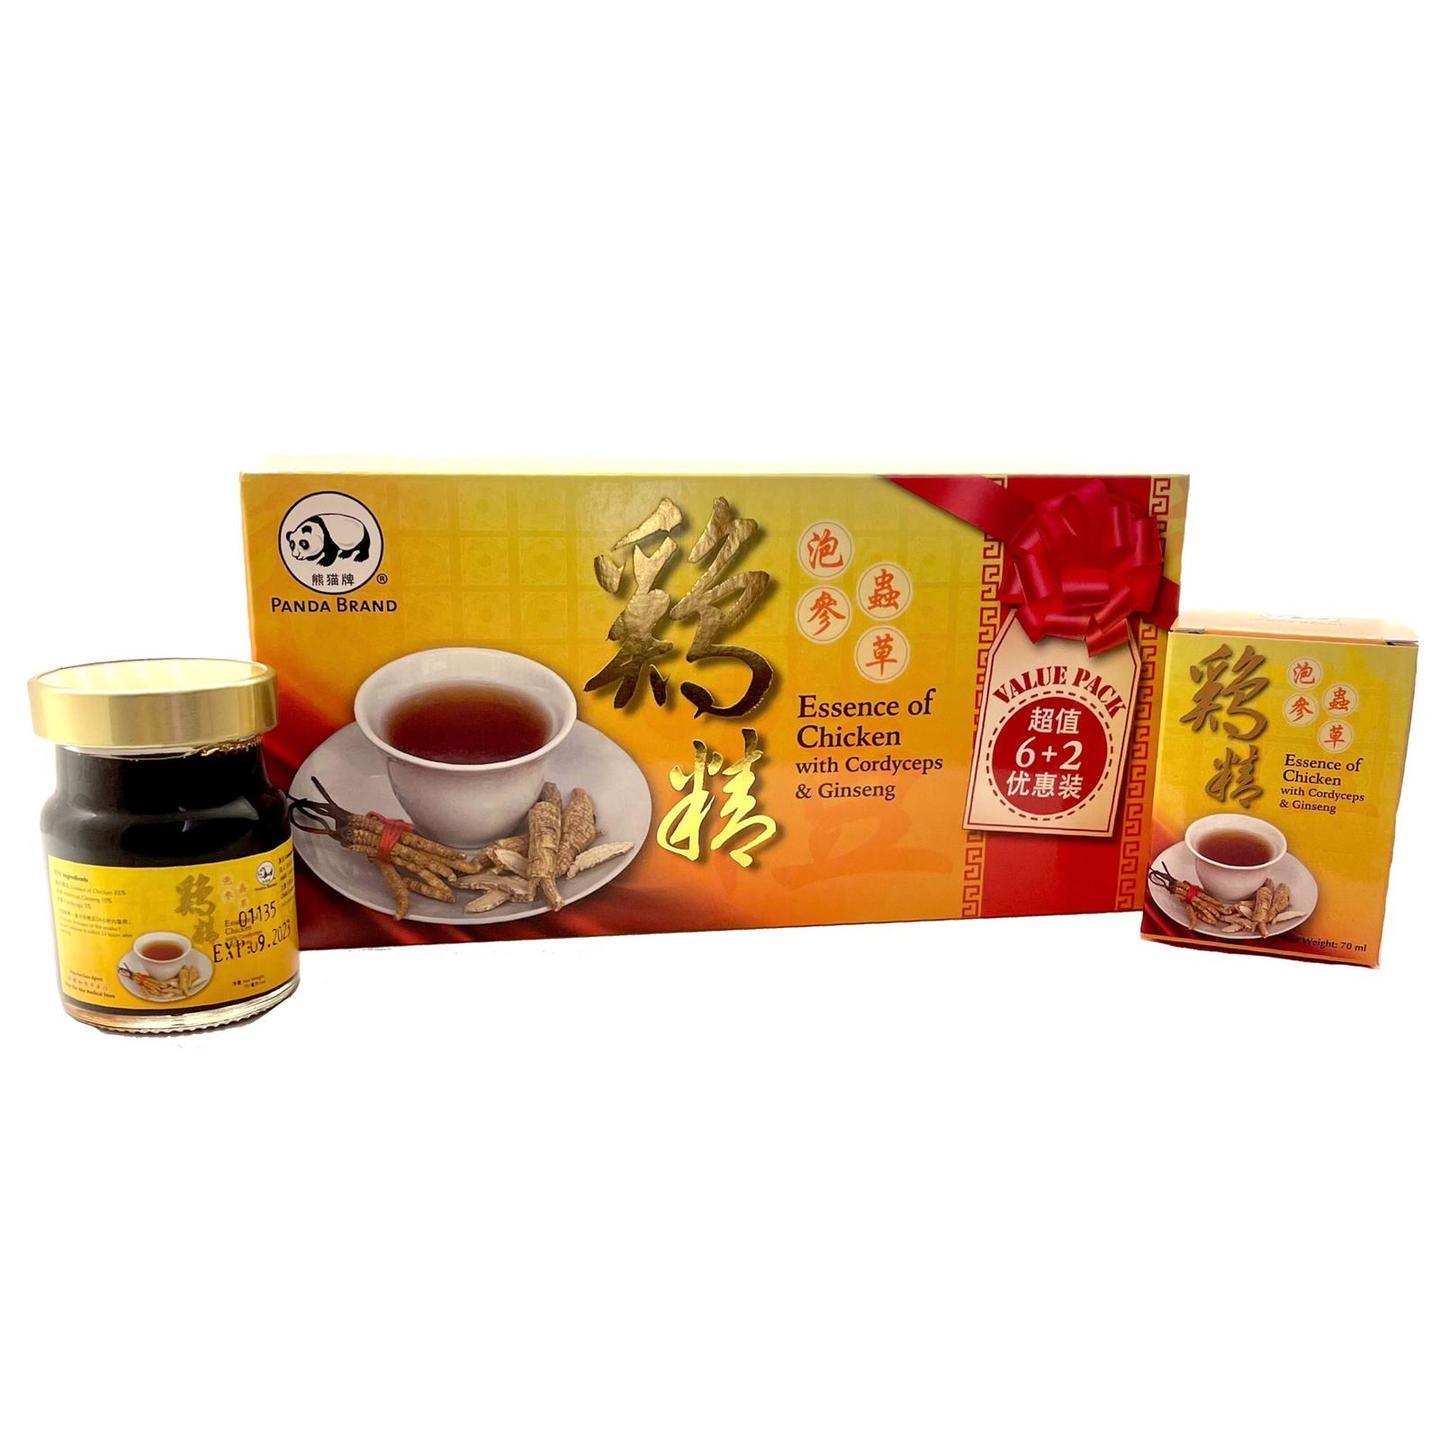 PANDA BRAND Essence Of Chicken With Cordyceps & Ginseng 虫草泡参鸡精 ( 6 +2 BOT)*PROMOTION FOR 2*